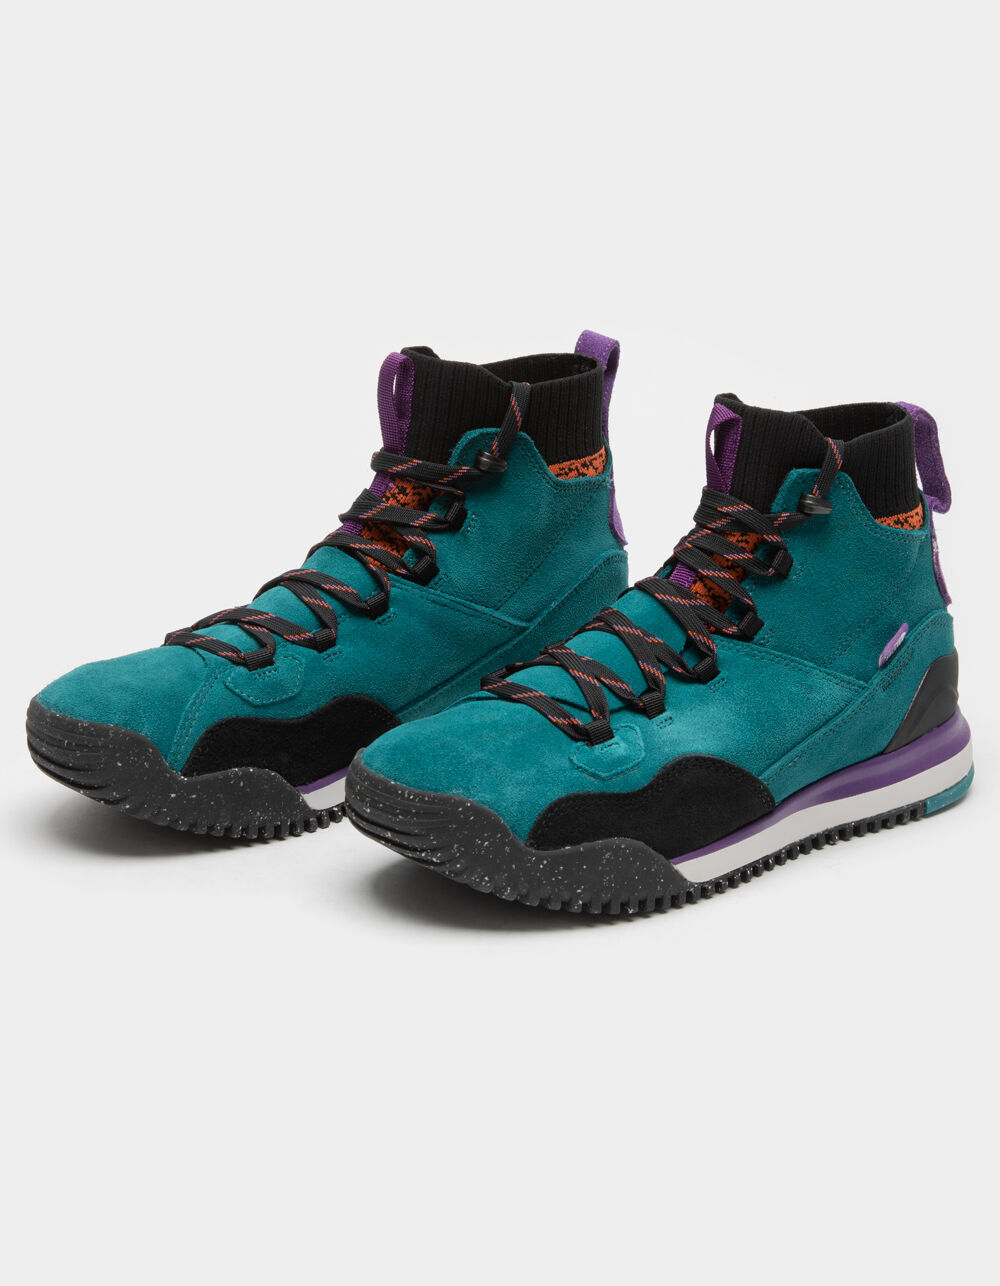 THE NORTH FACE Back To Berkeley III Sport Mens Waterproof Boots 